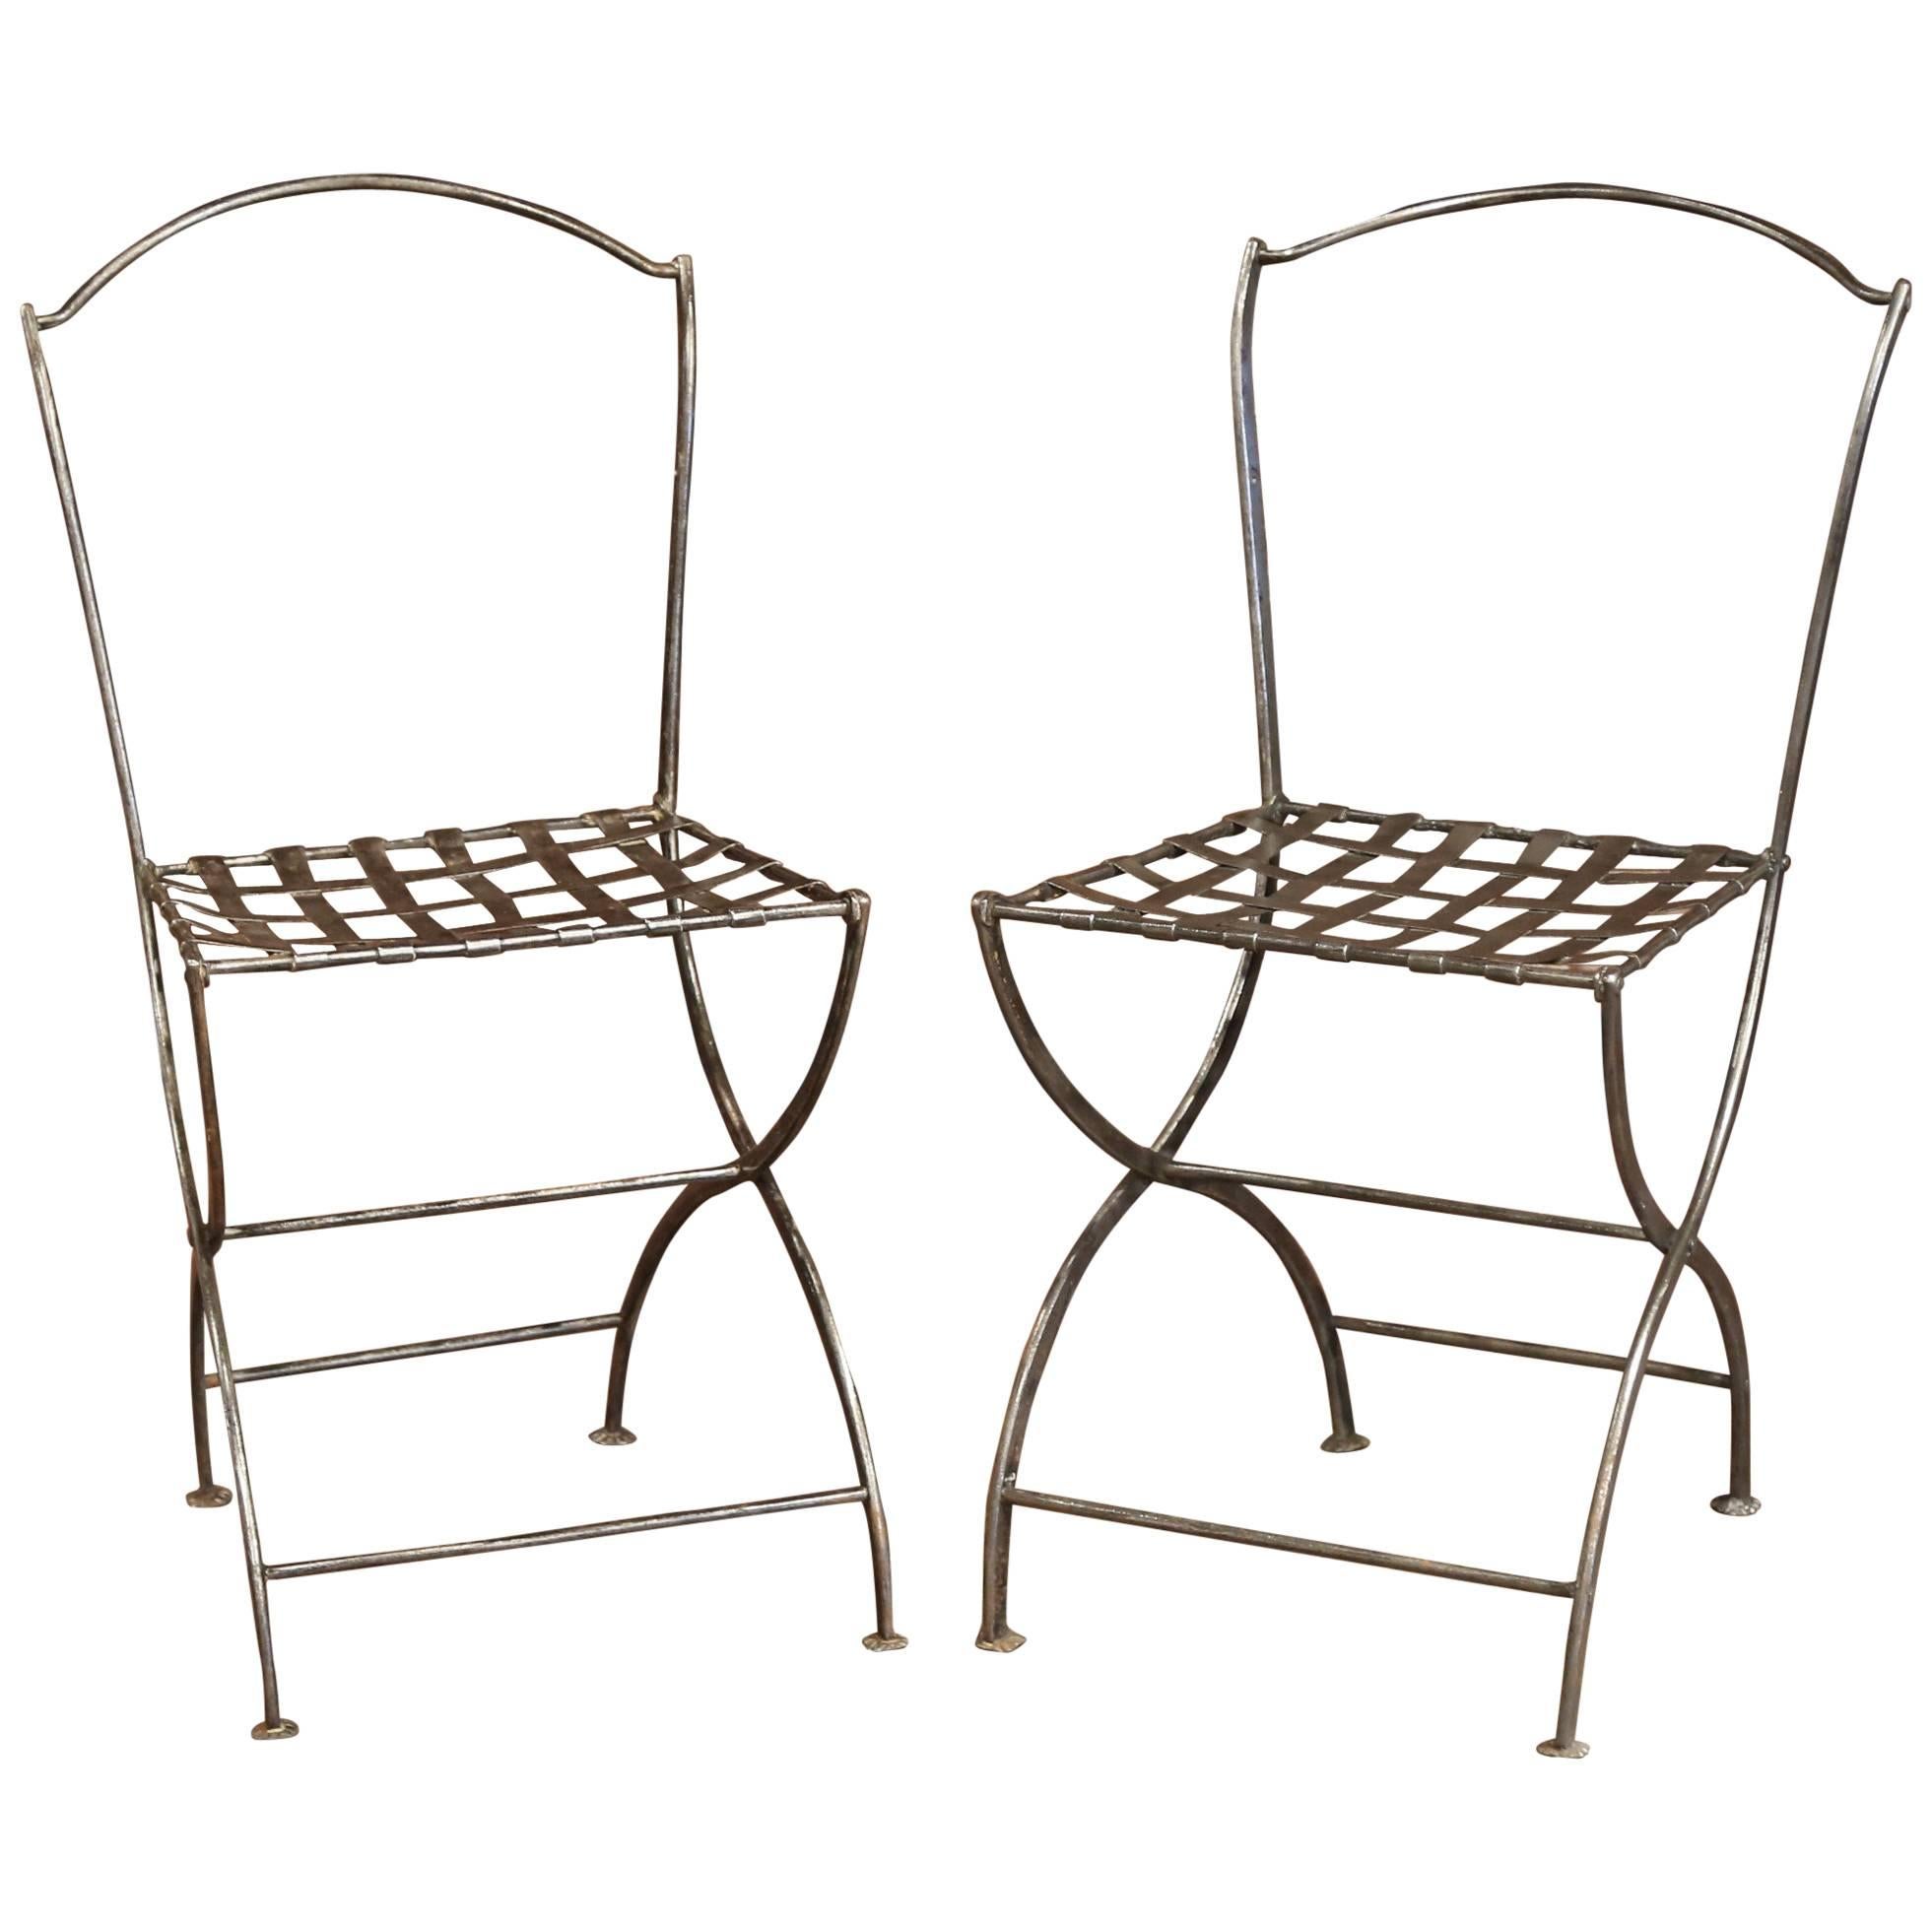 Pair of 19th Century French Polished Iron Bistrot Chairs from Paris